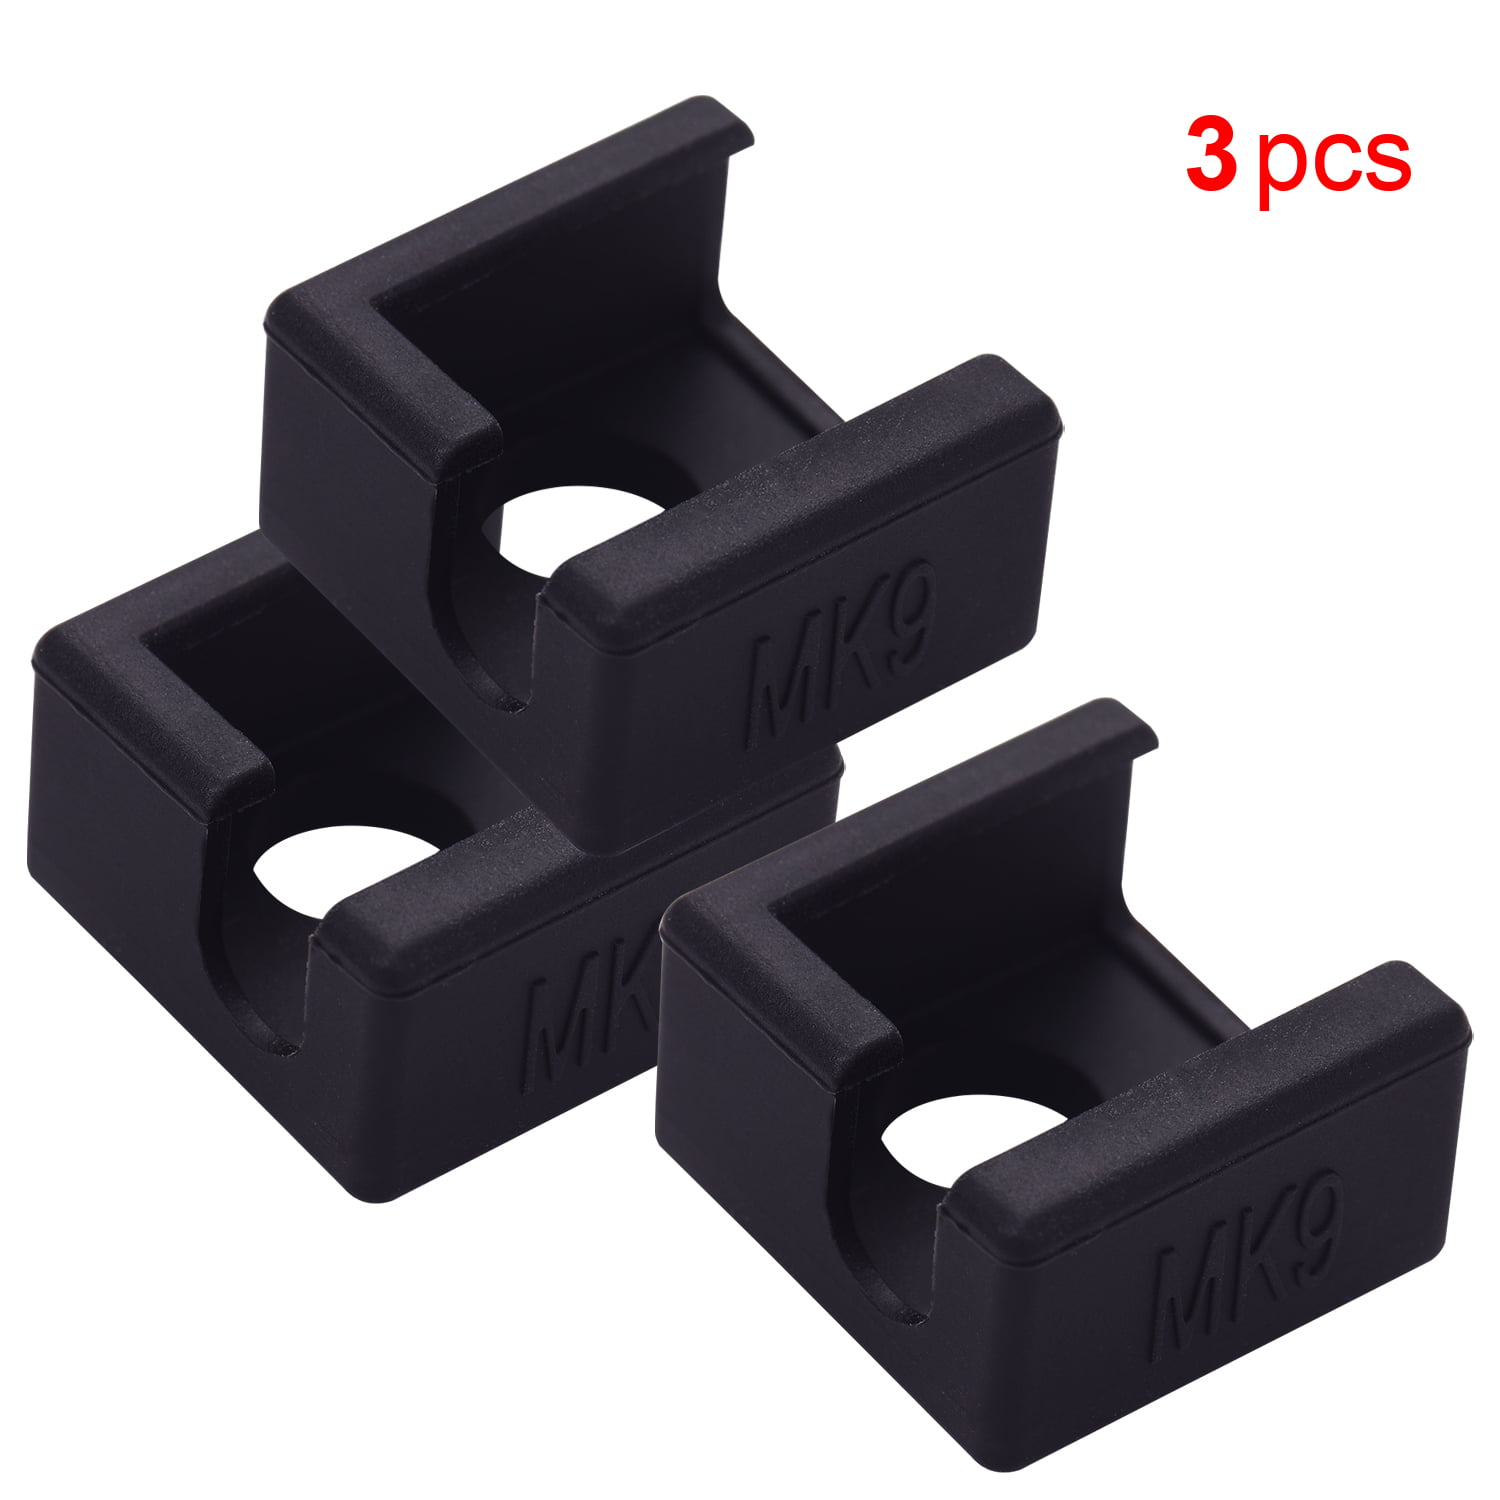 Anet A8,Black HWA KUNG 5pcs 3D Printer Silicone Sock,High Temperature Resistance Silicone Protection Case MK7 MK8 MK9 Hot End Compatible with Creality CR-10,10S,S4,S5,Ender 3 